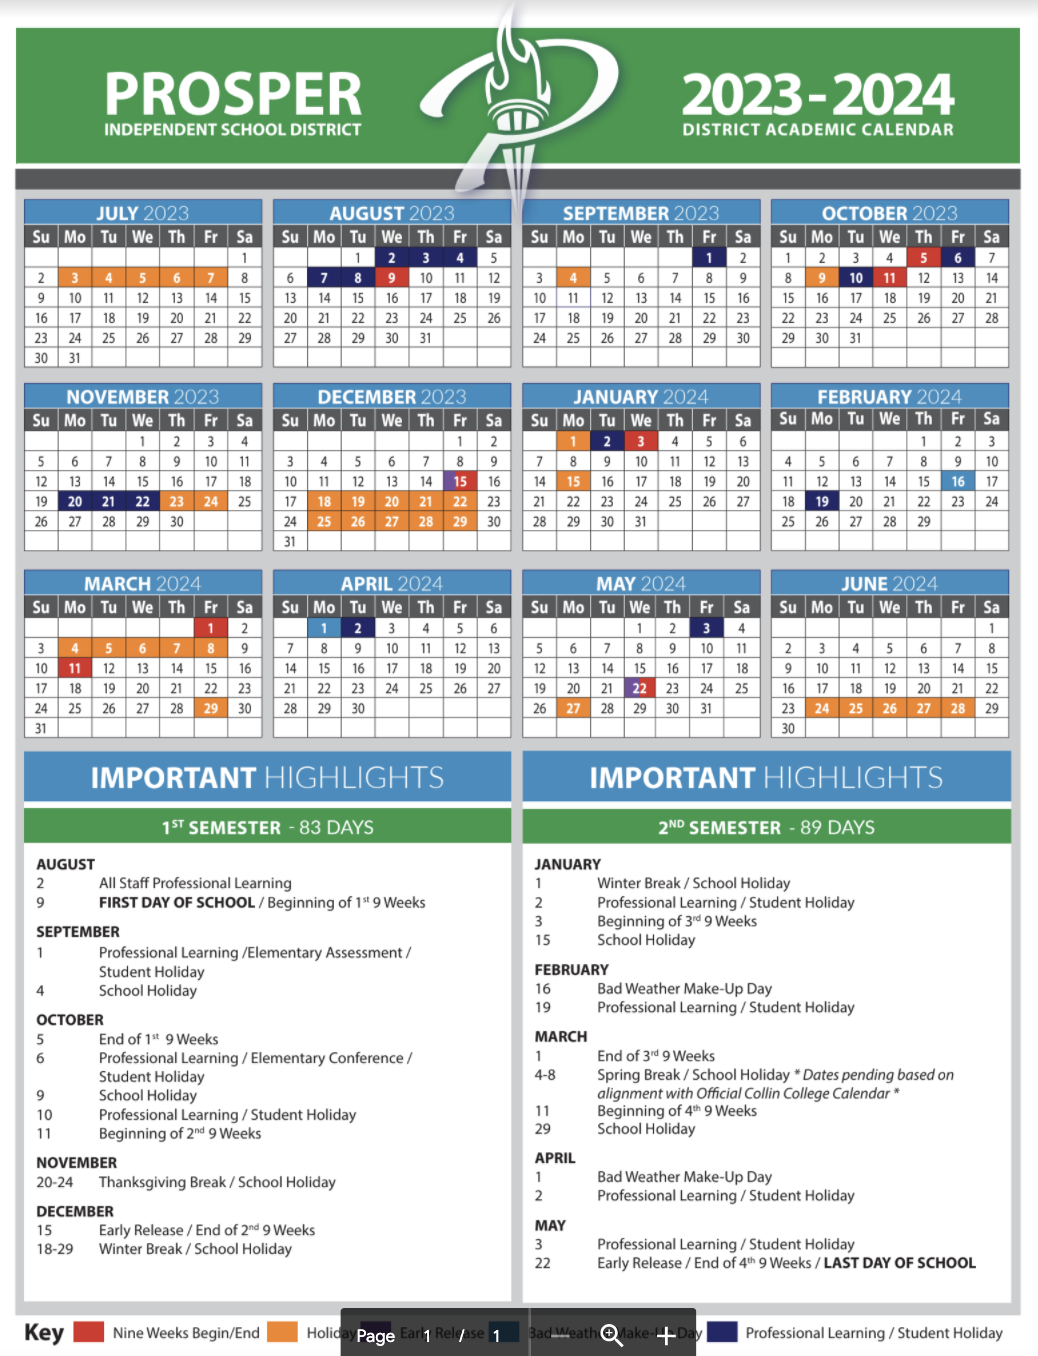 Pisd Calendar 2022 23 Here Are Prosper Isd's School Calendars For The 2022-2023 And The 2023-2024  School Years | Cities | Checkoutdfw.com